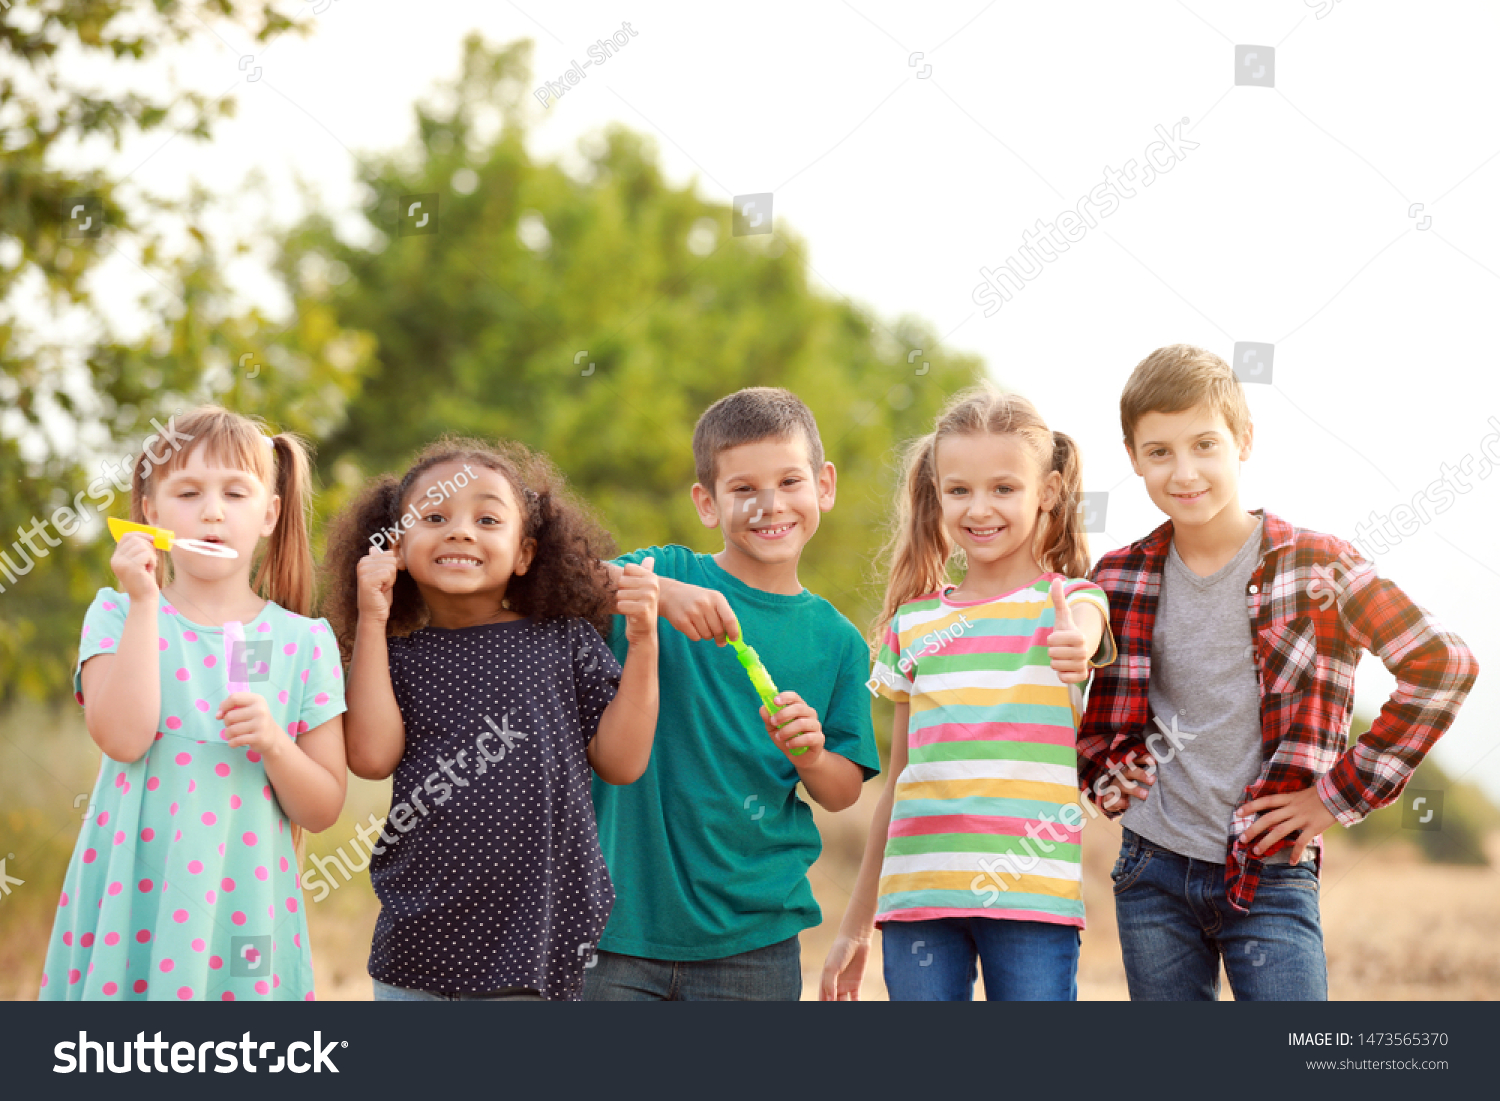 Portrait of cute little children showing thumb-up gesture outdoors #1473565370